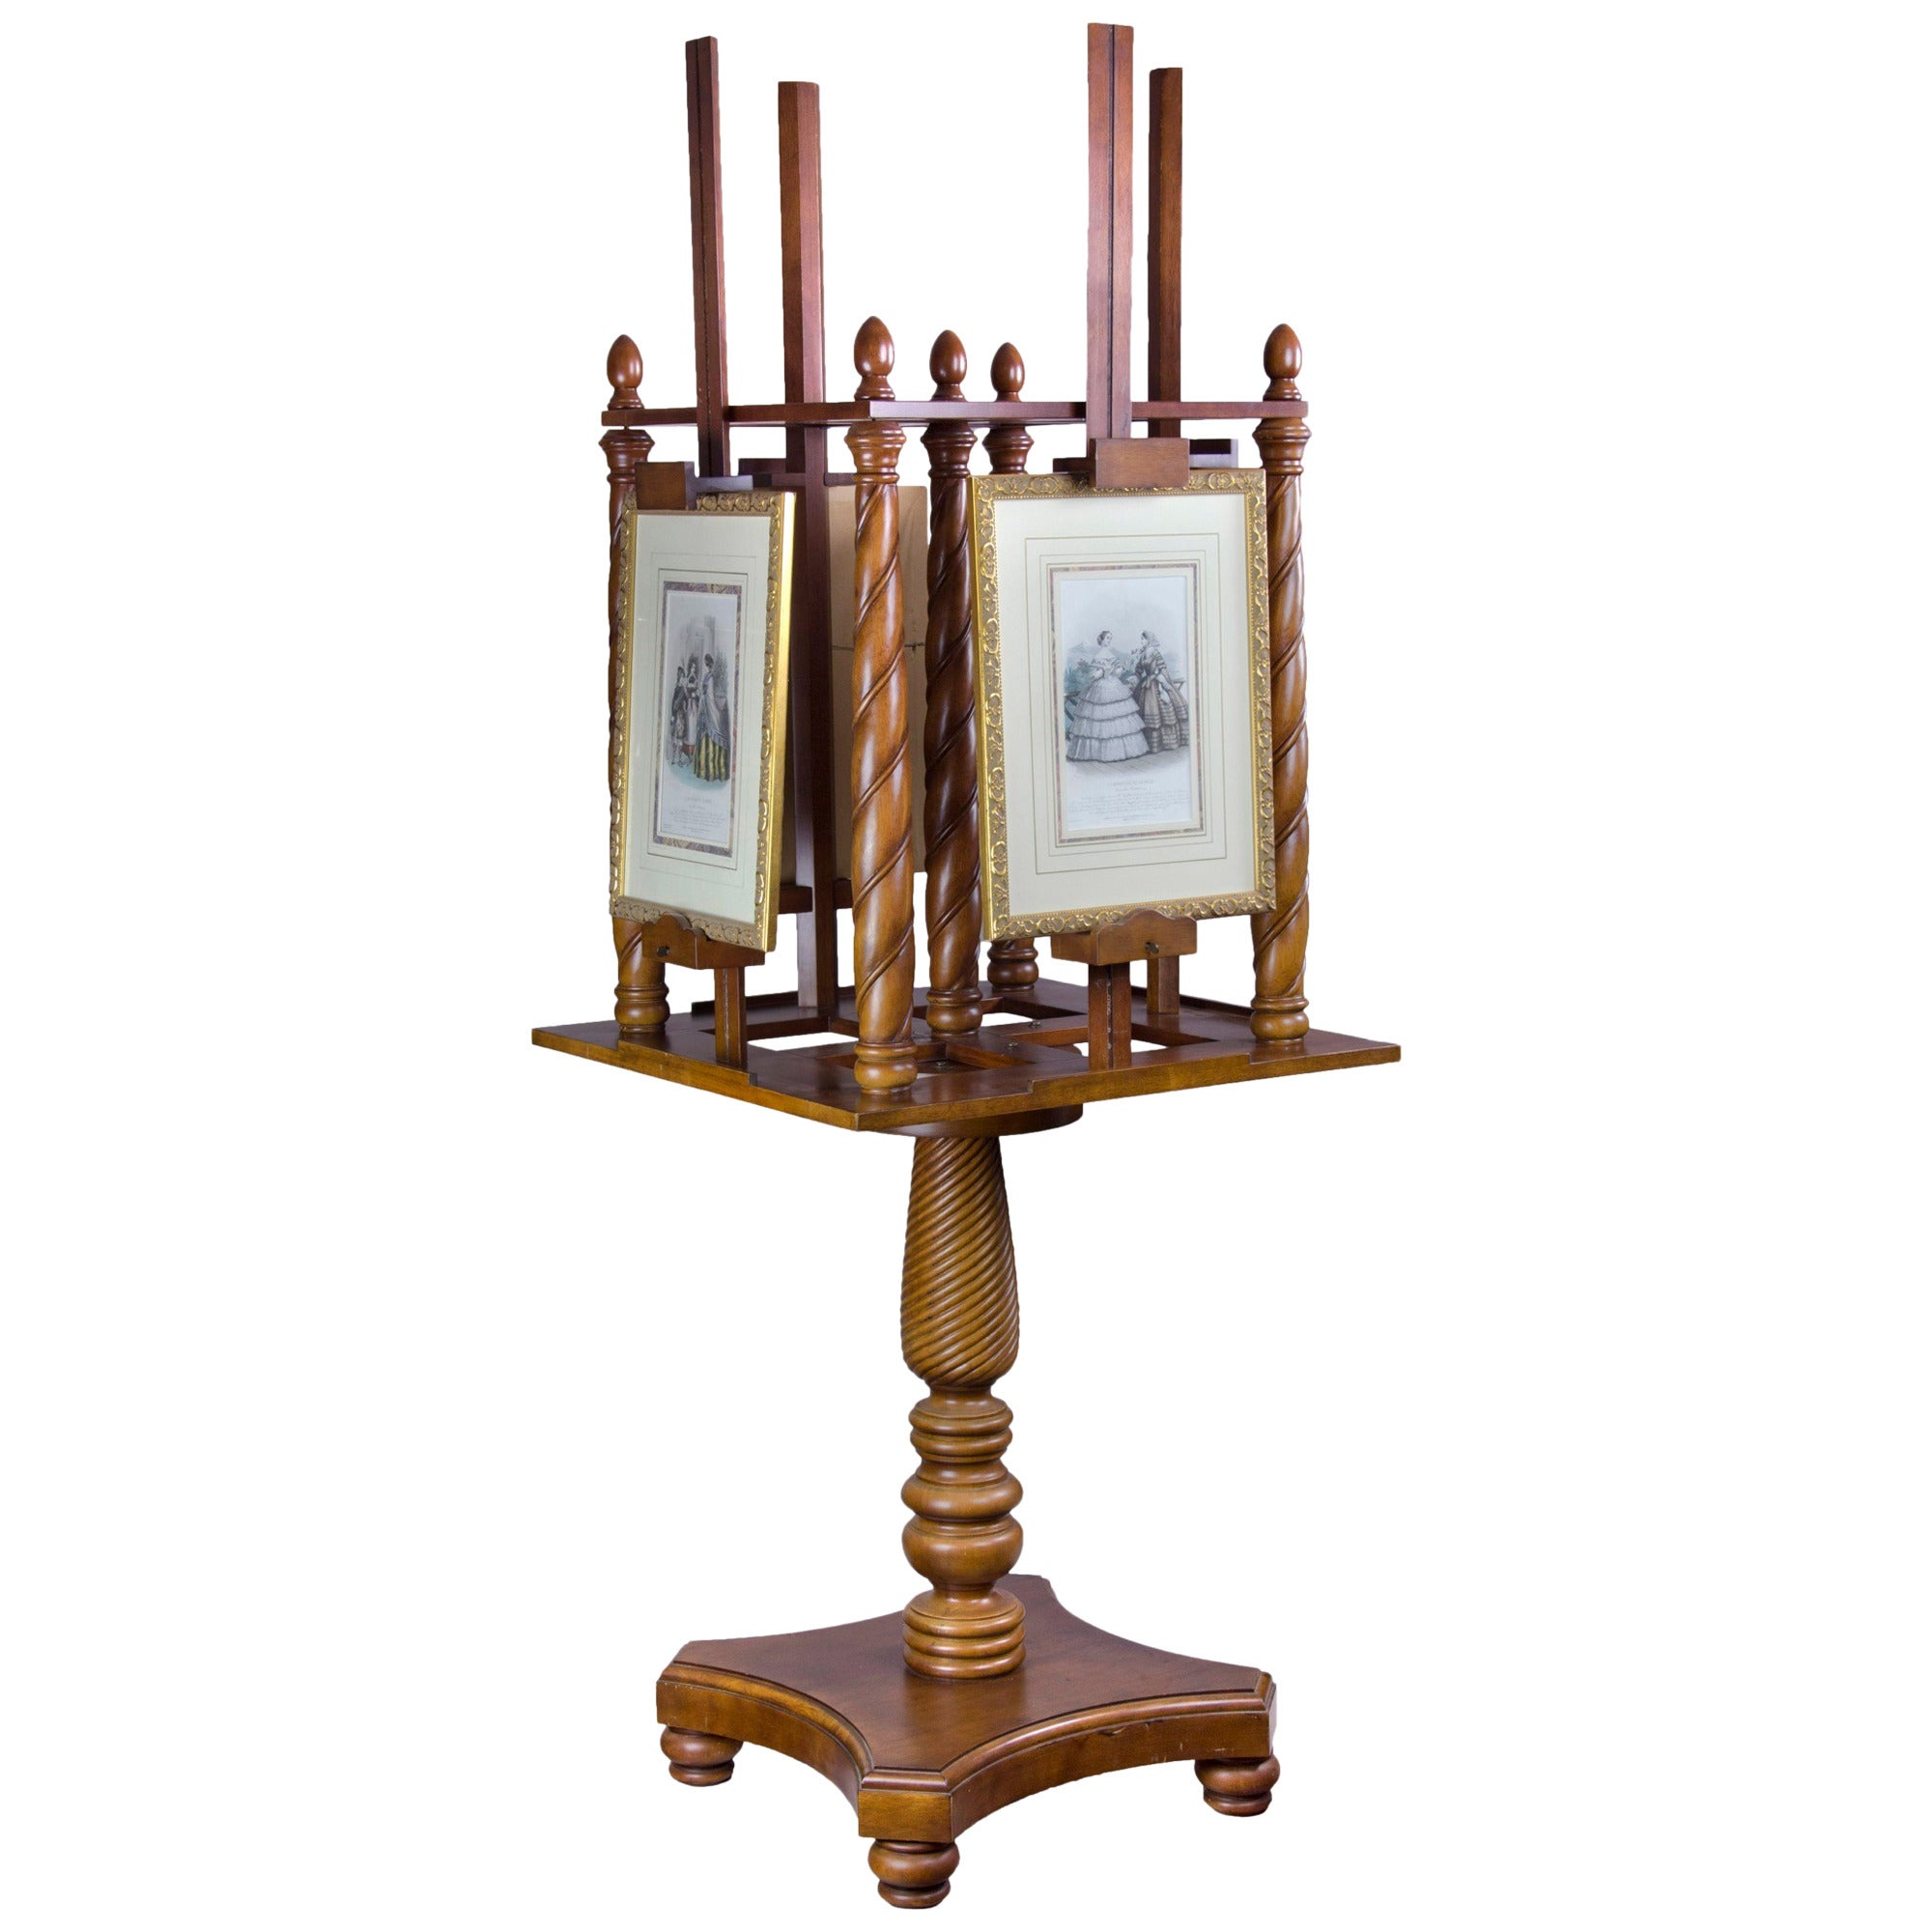 Large Mahogany Painting Stand or Easel with a Revolving Four-Picture Capability